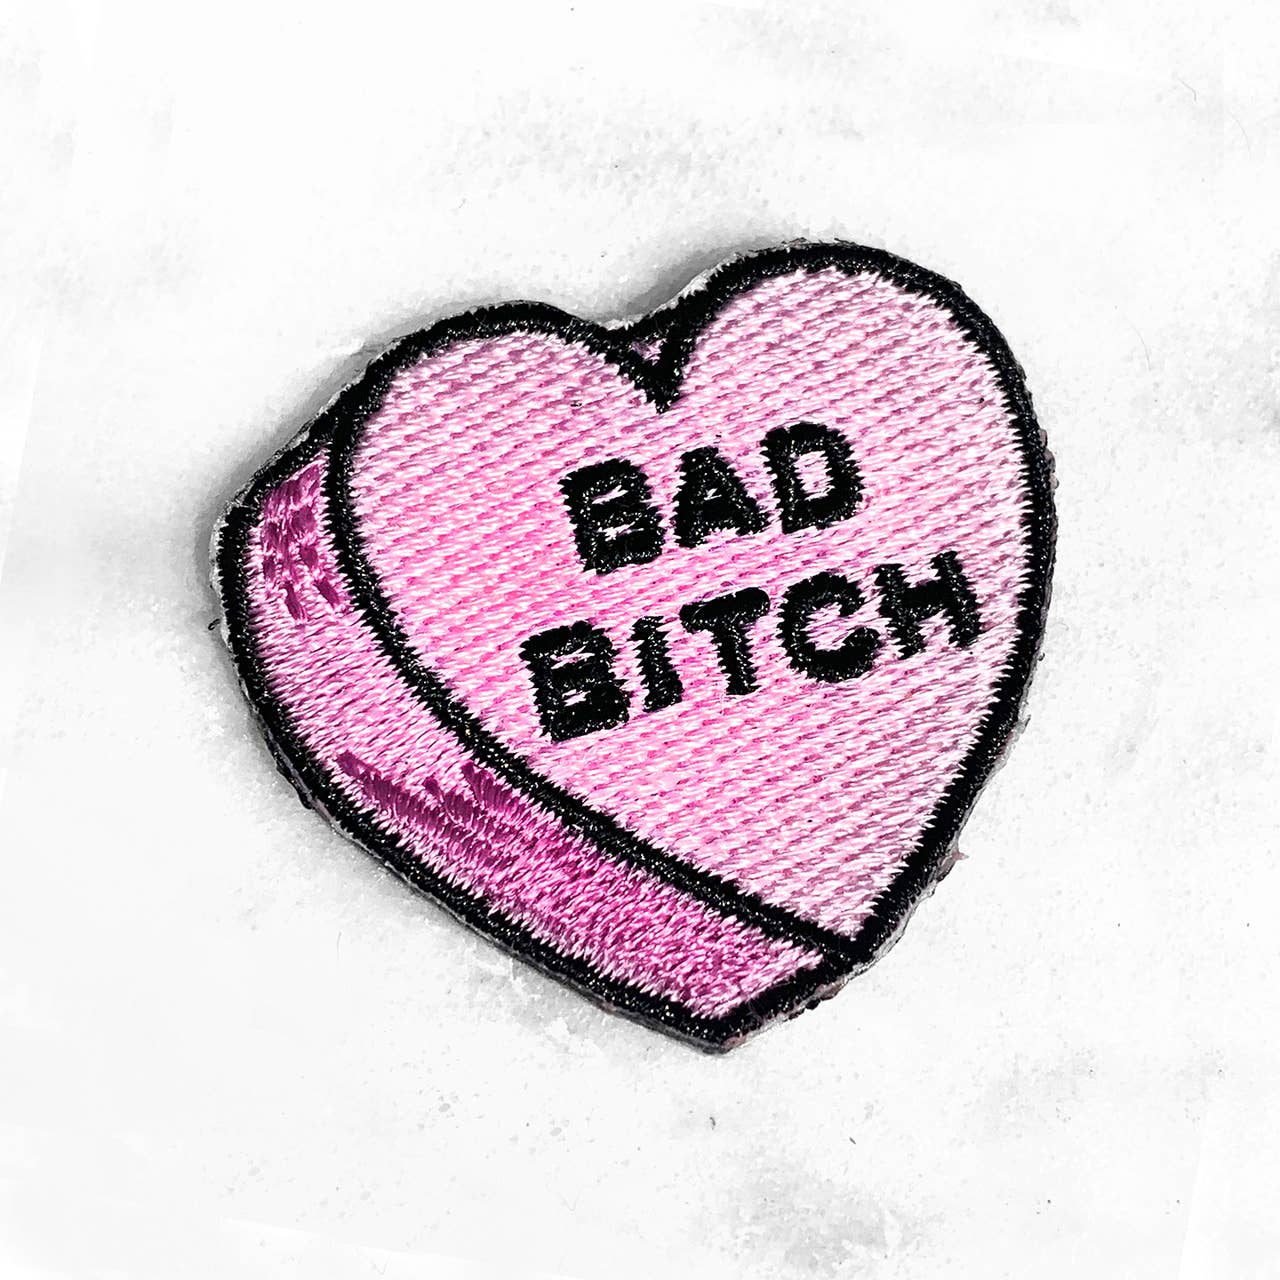 Candy Heart "Bad Bitch" Patch - Patch